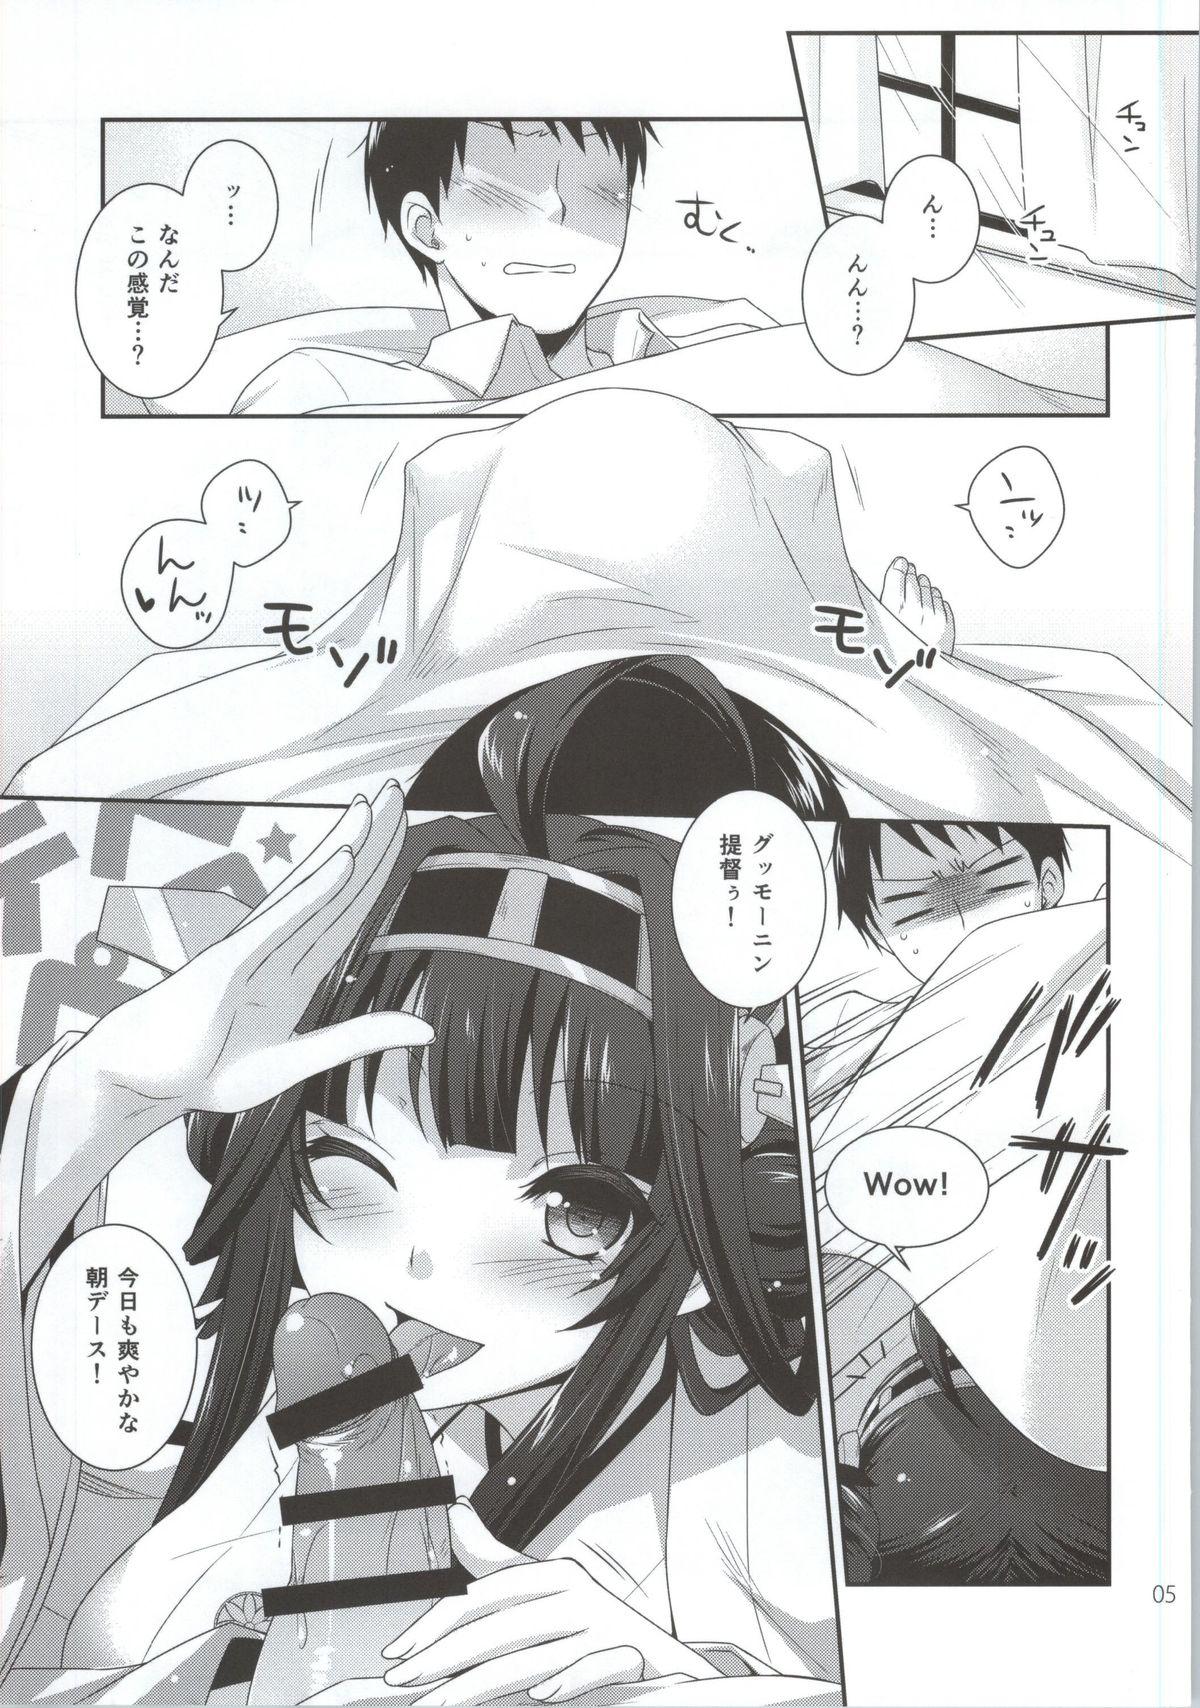 Moneytalks WYMM? - Kantai collection Uncensored - Page 2